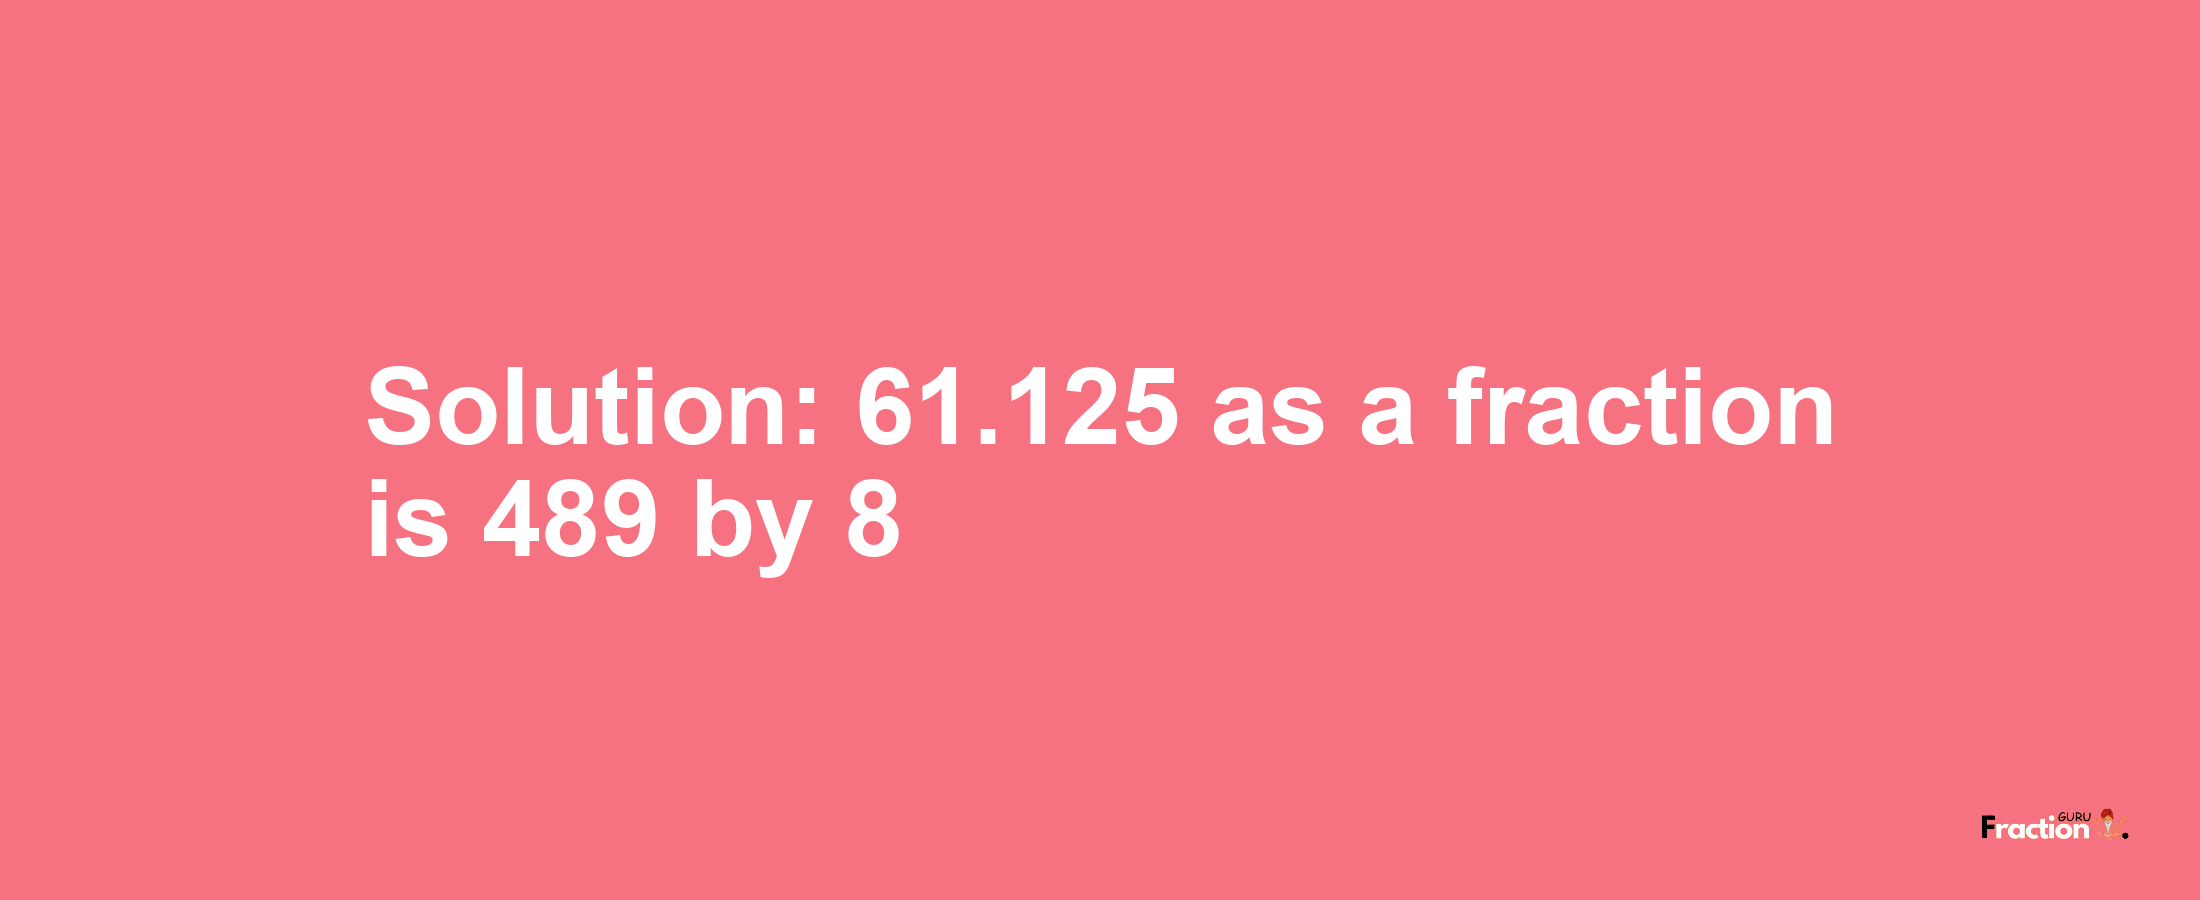 Solution:61.125 as a fraction is 489/8